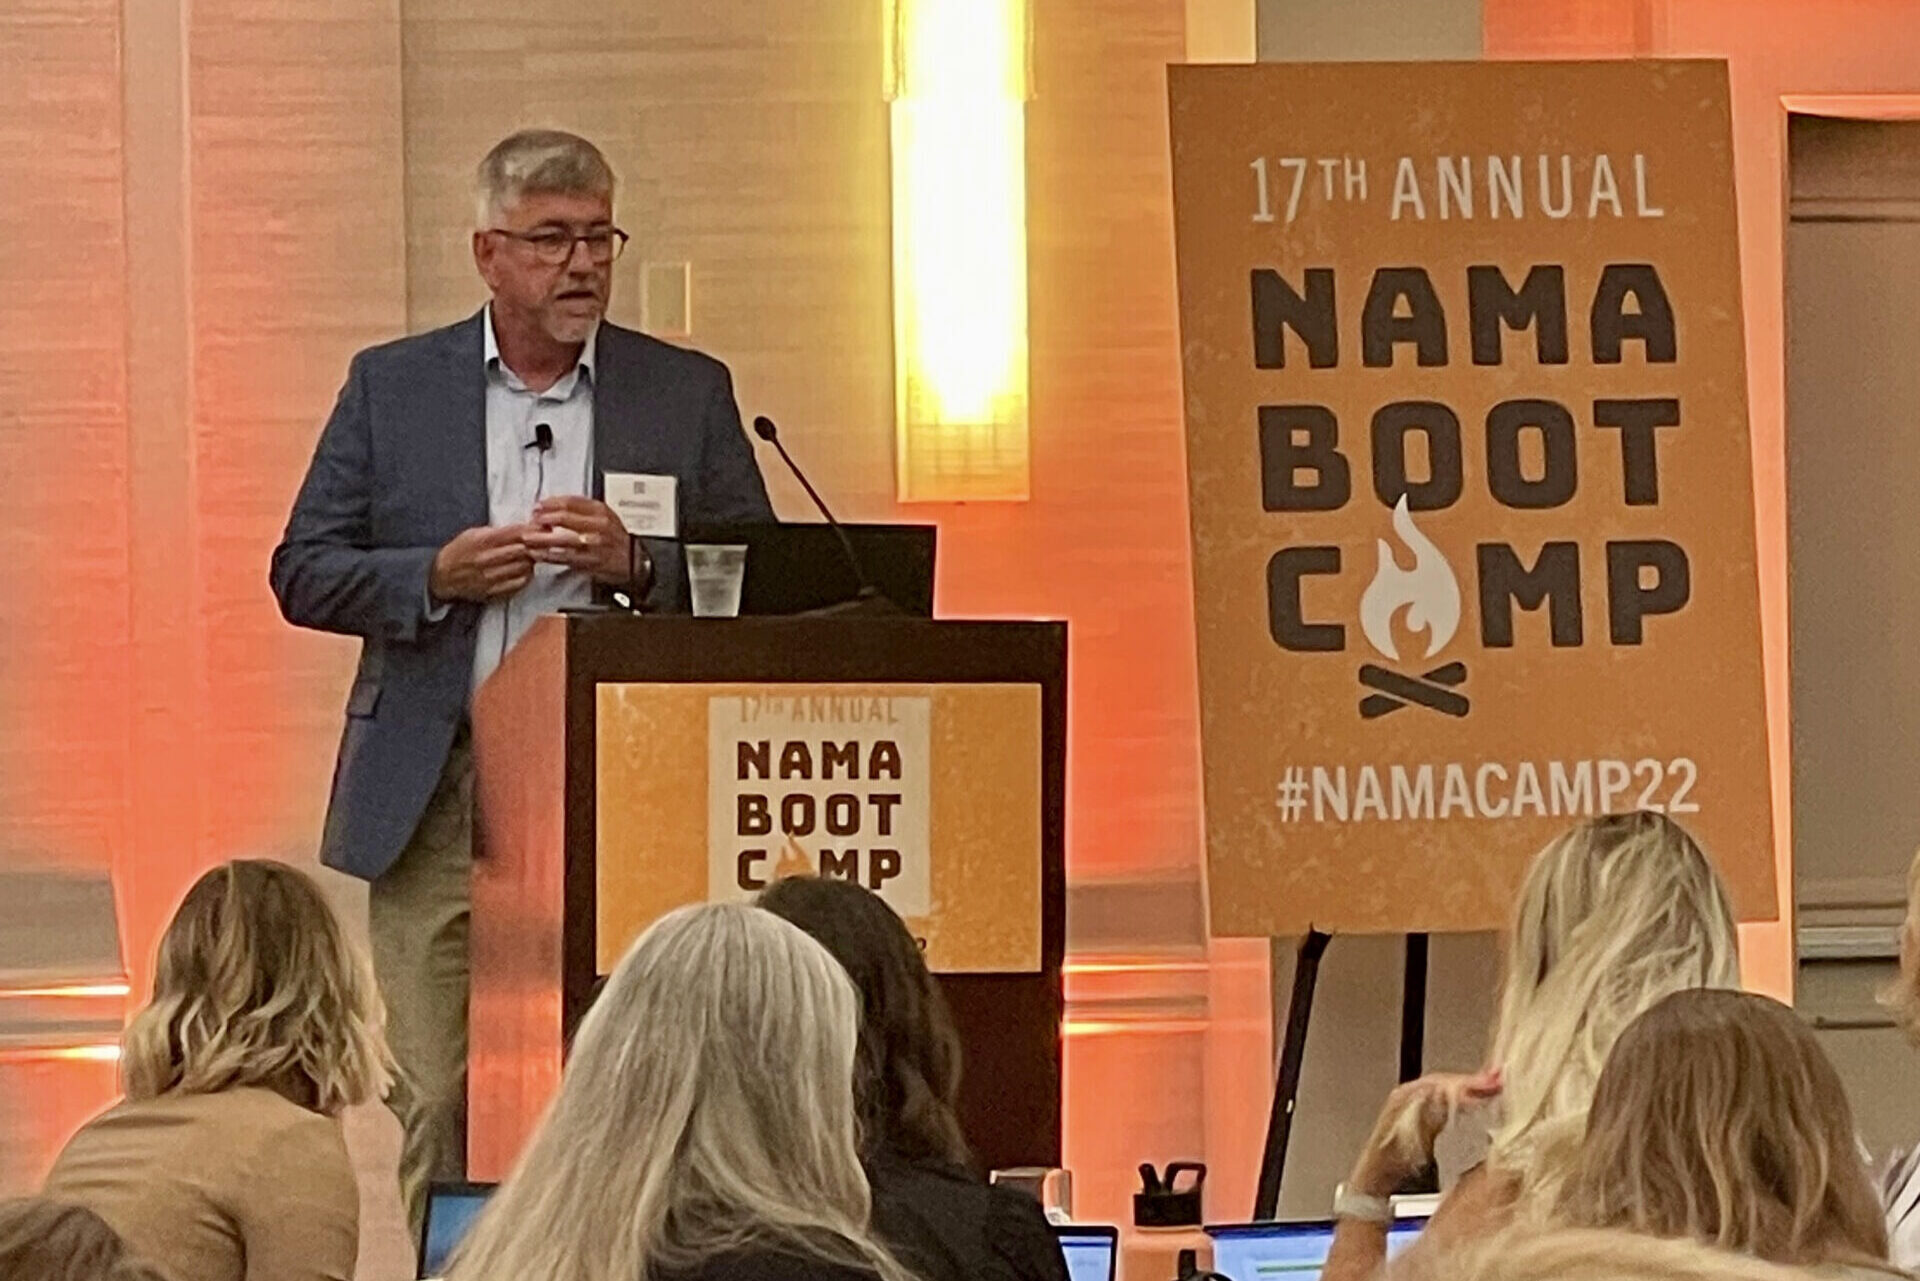 Richard Fordyce leads a session about trends in agriculture at the National Agri-Marketing Association's annual Boot Camp event.